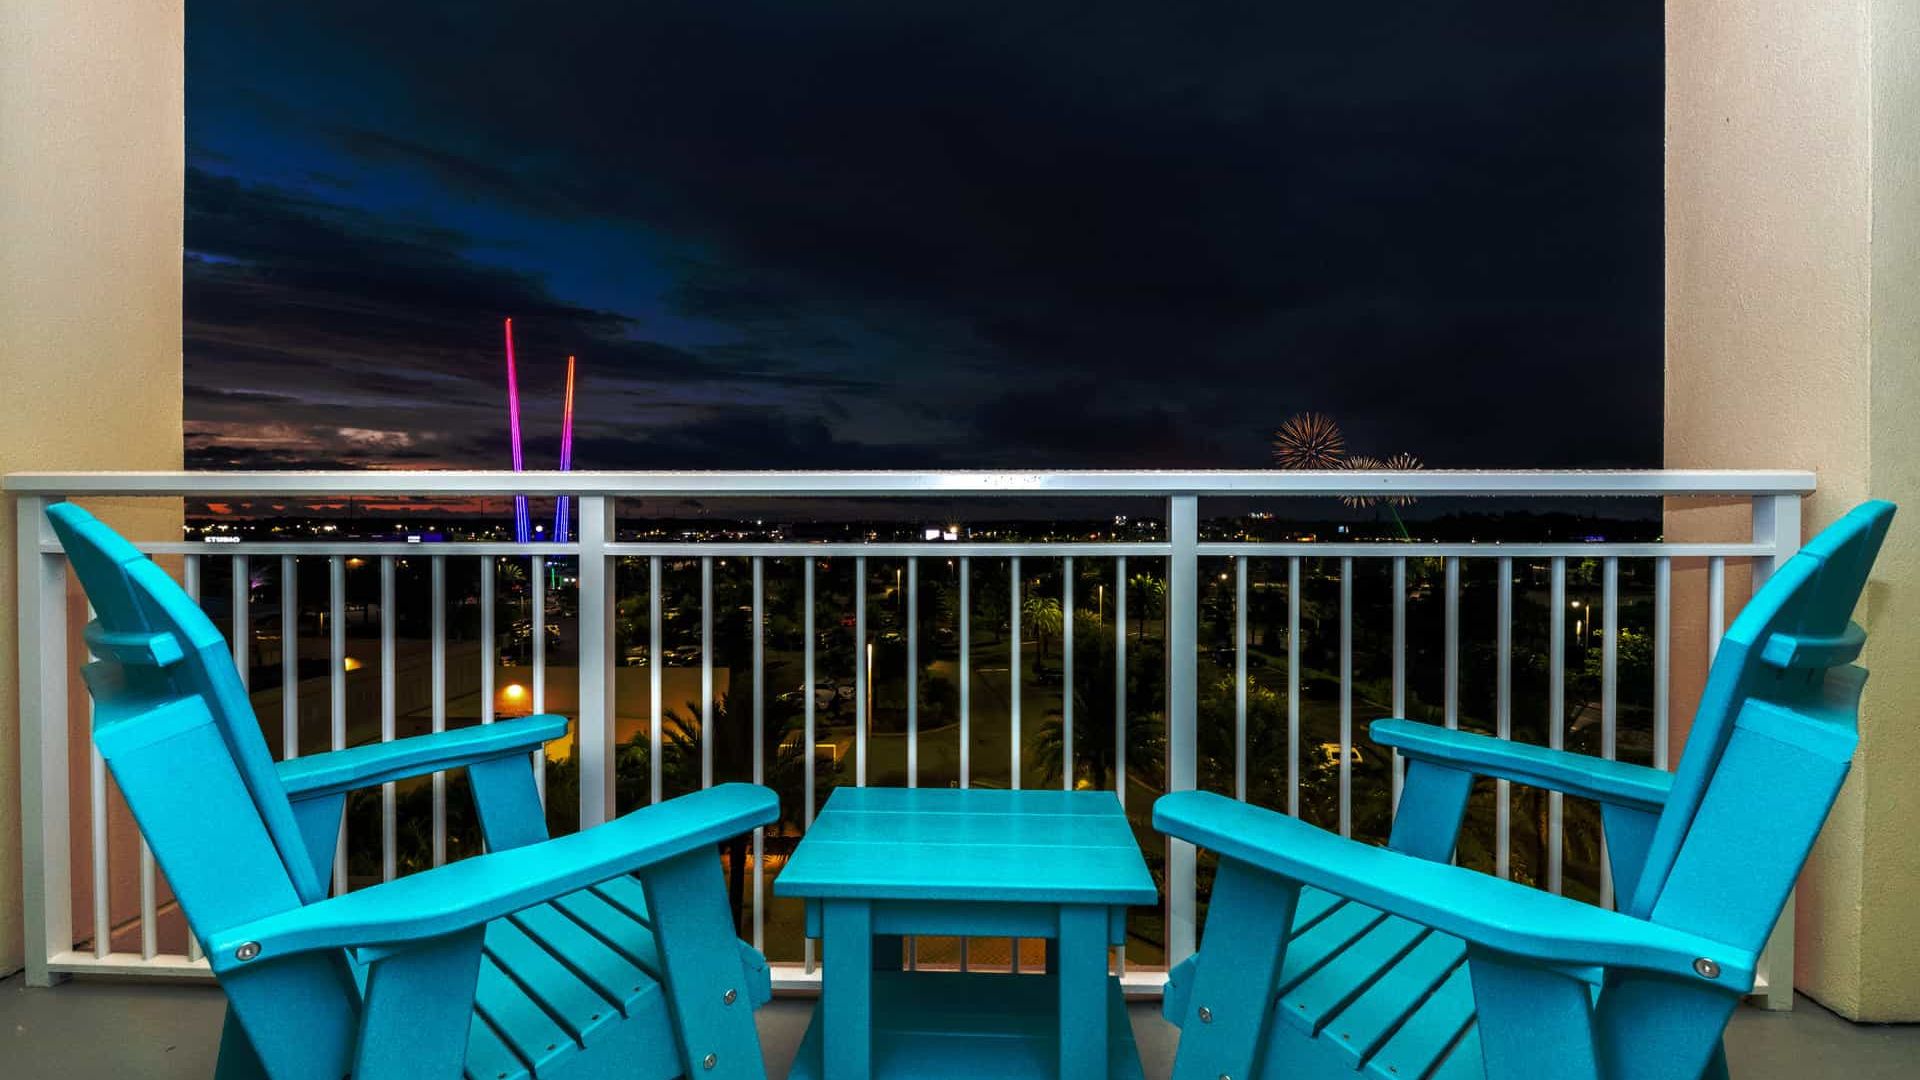 King Park View room balcony overlooking Orlando attractions area at night